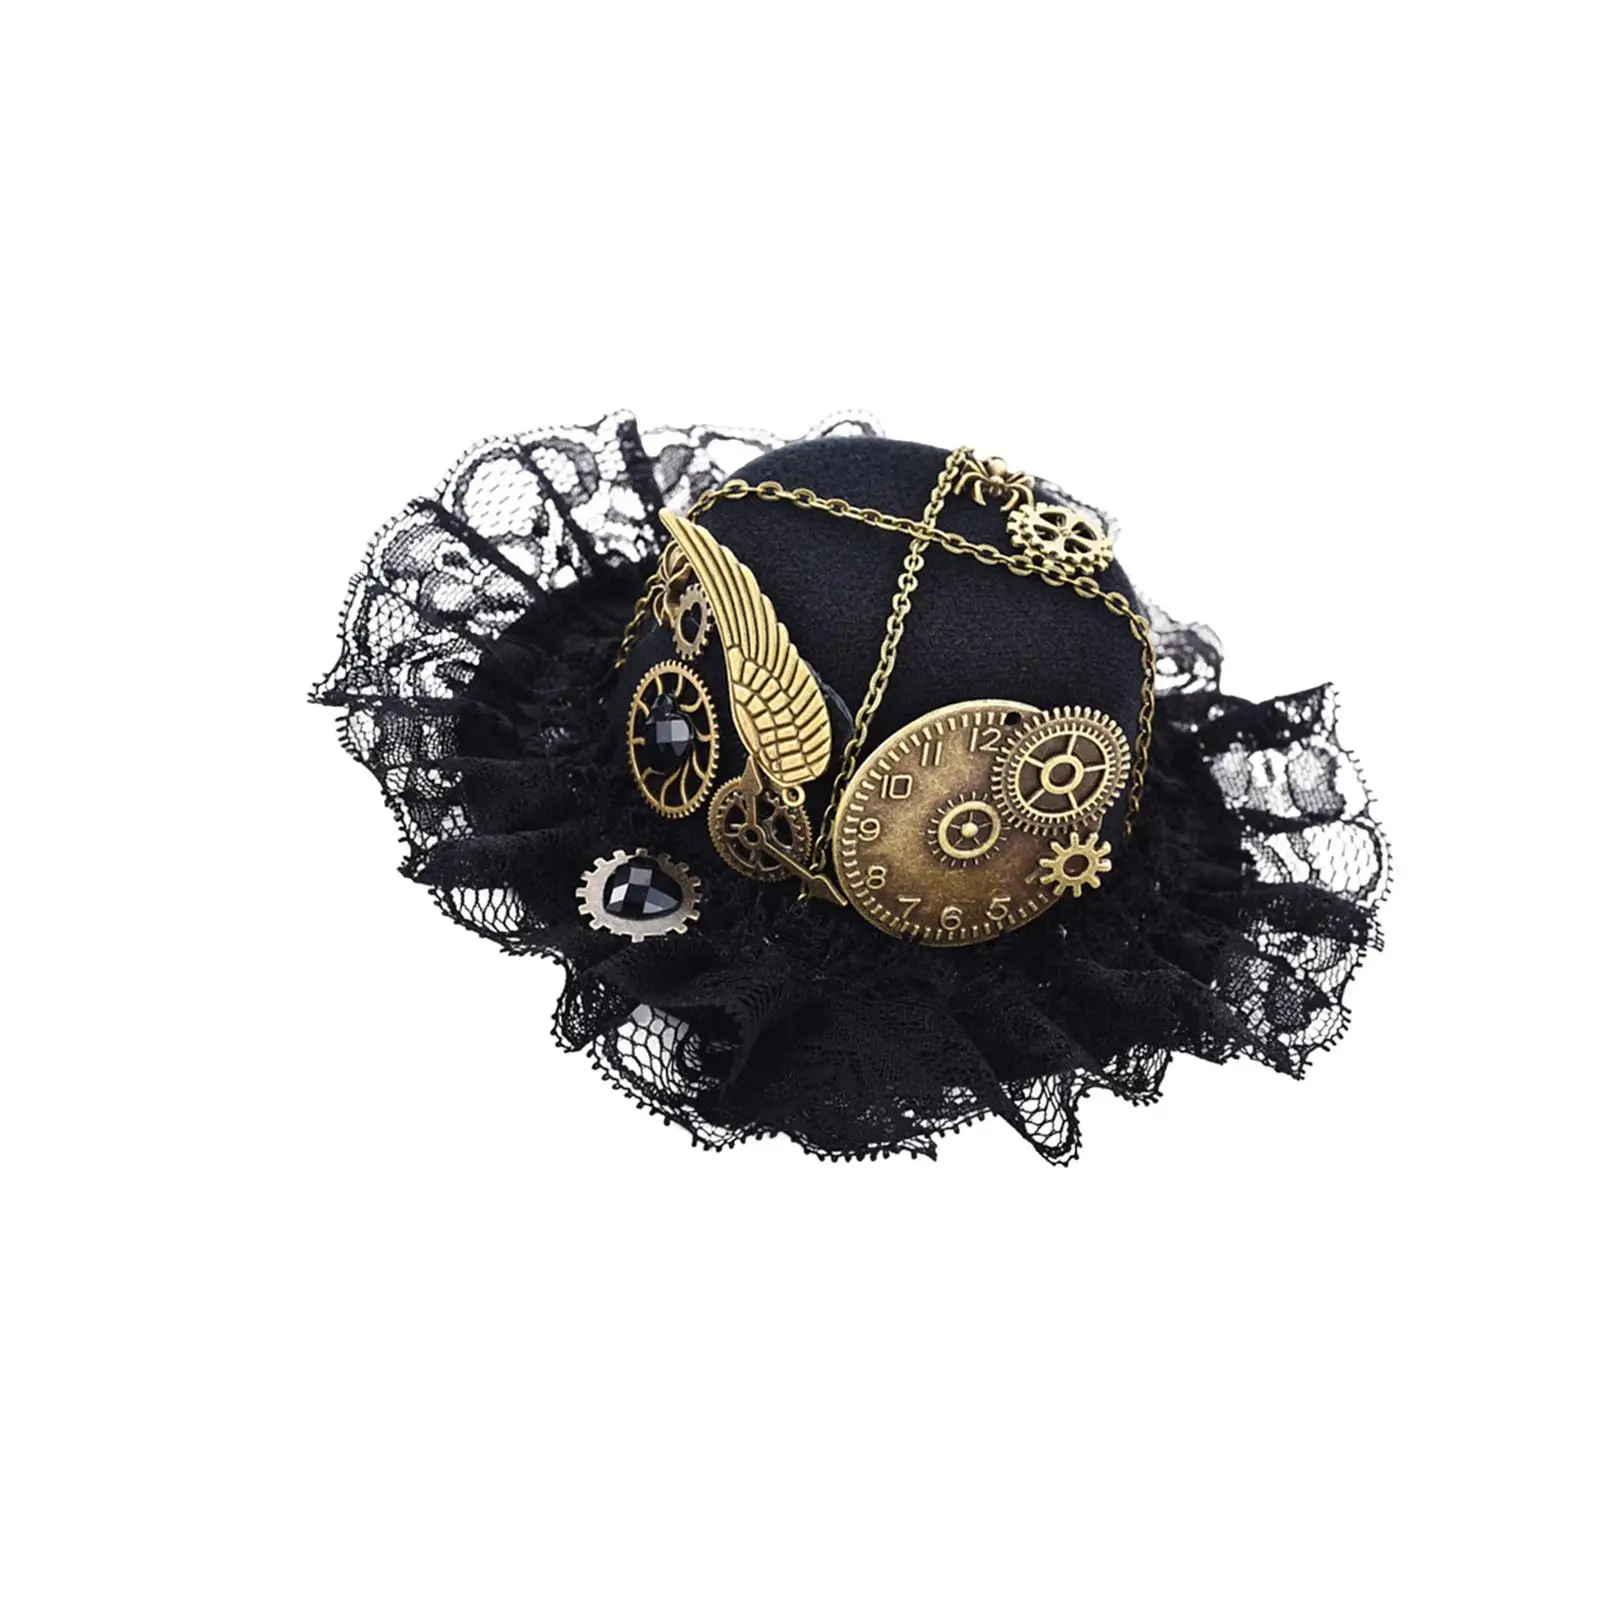 Vintage Style Steampunk Top Hat Hair Clip Black for Women Halloween Cocktail